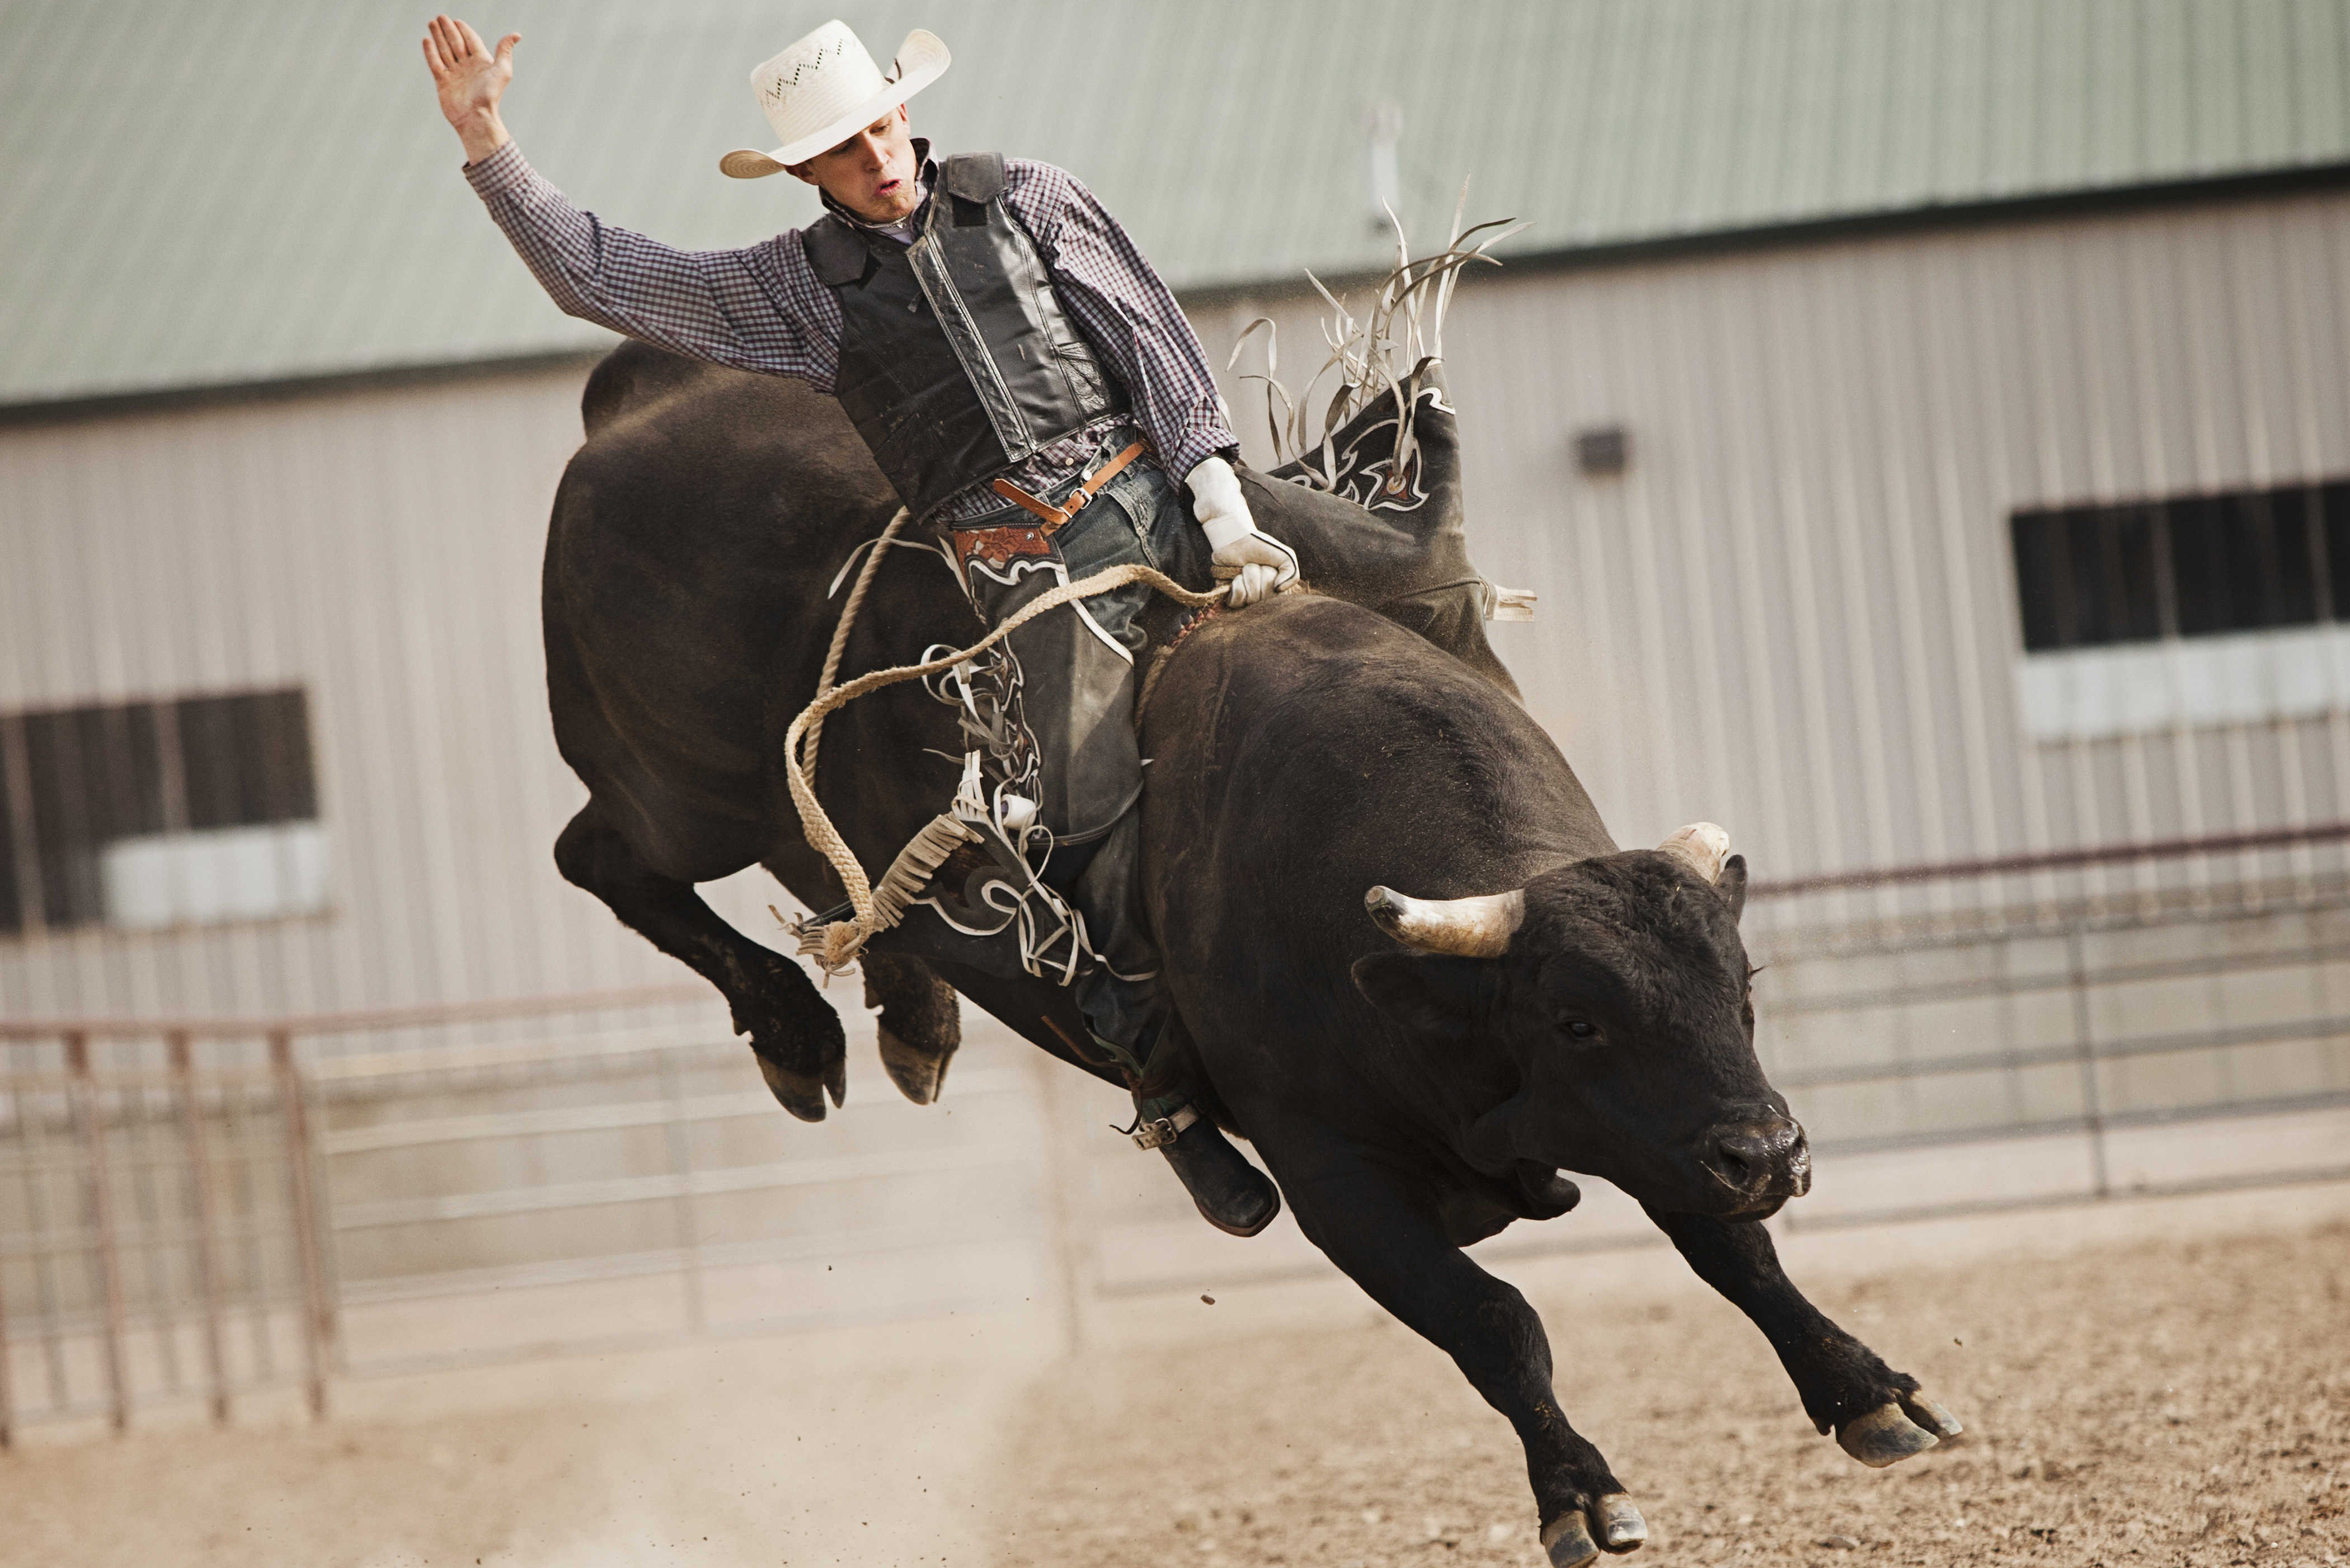 WME/IMG acquires Professional Bull Riders for reported $100M